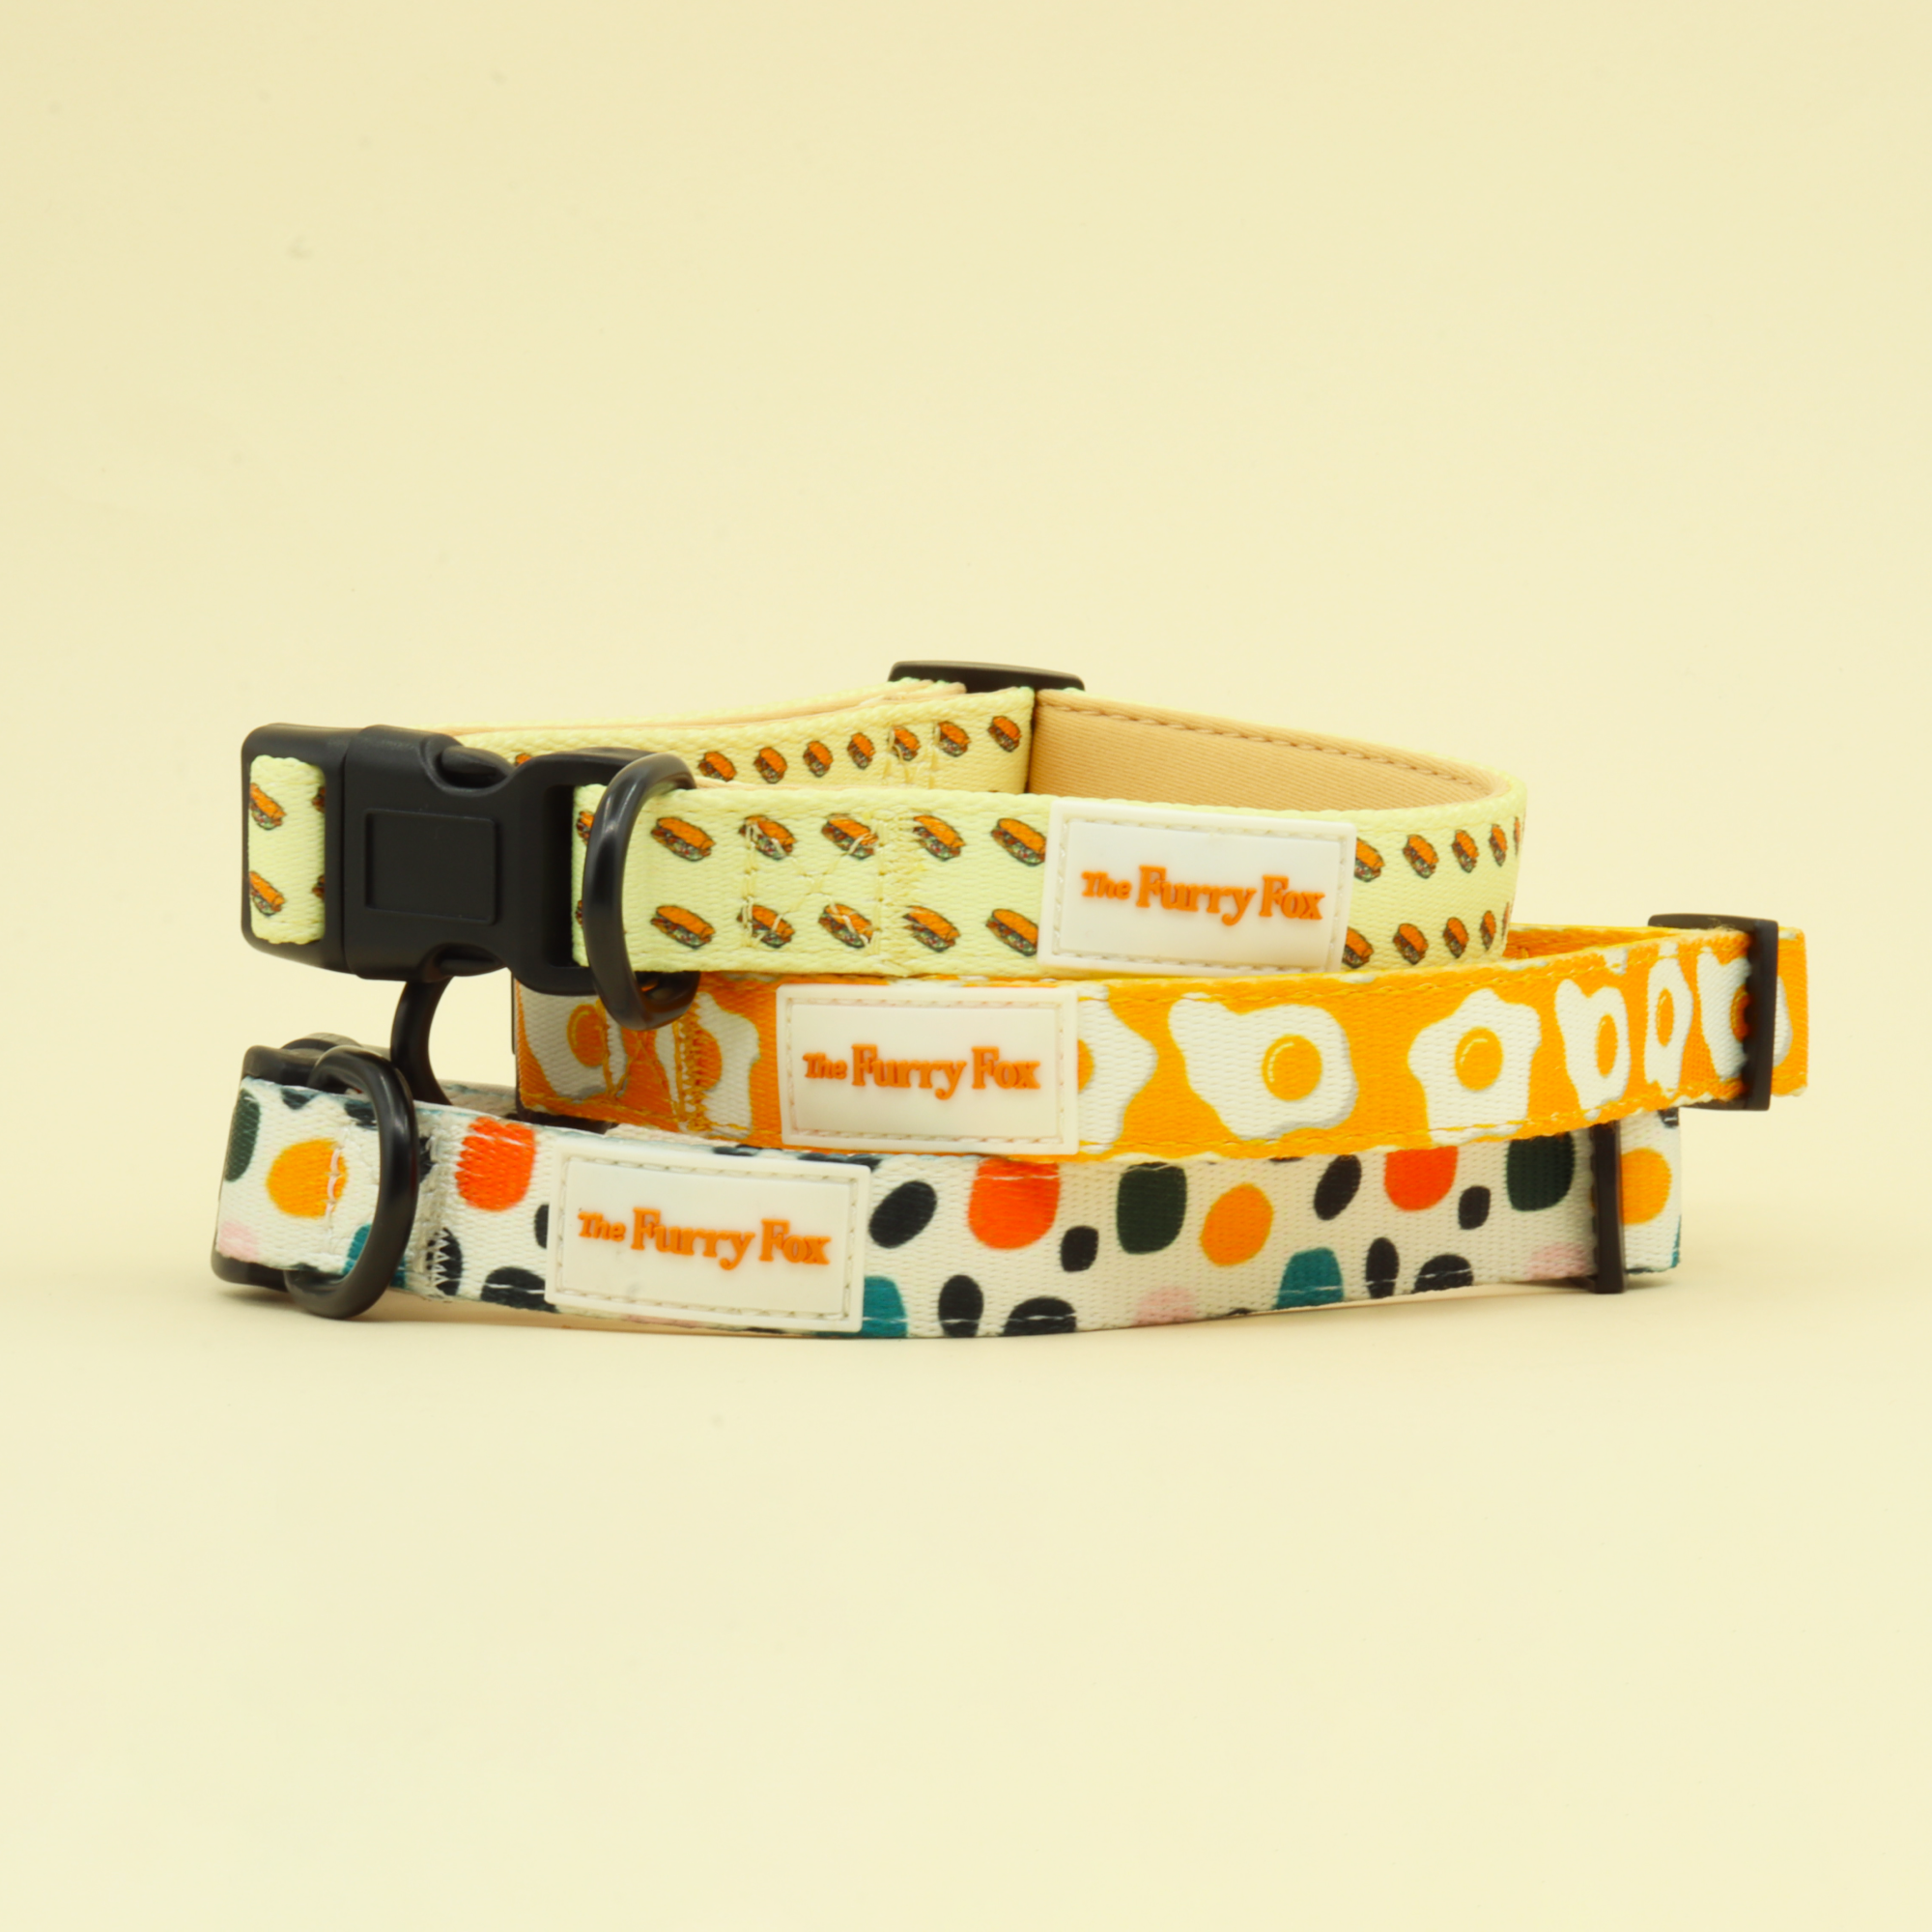 Paws and Slices: Adorable Burger Collar